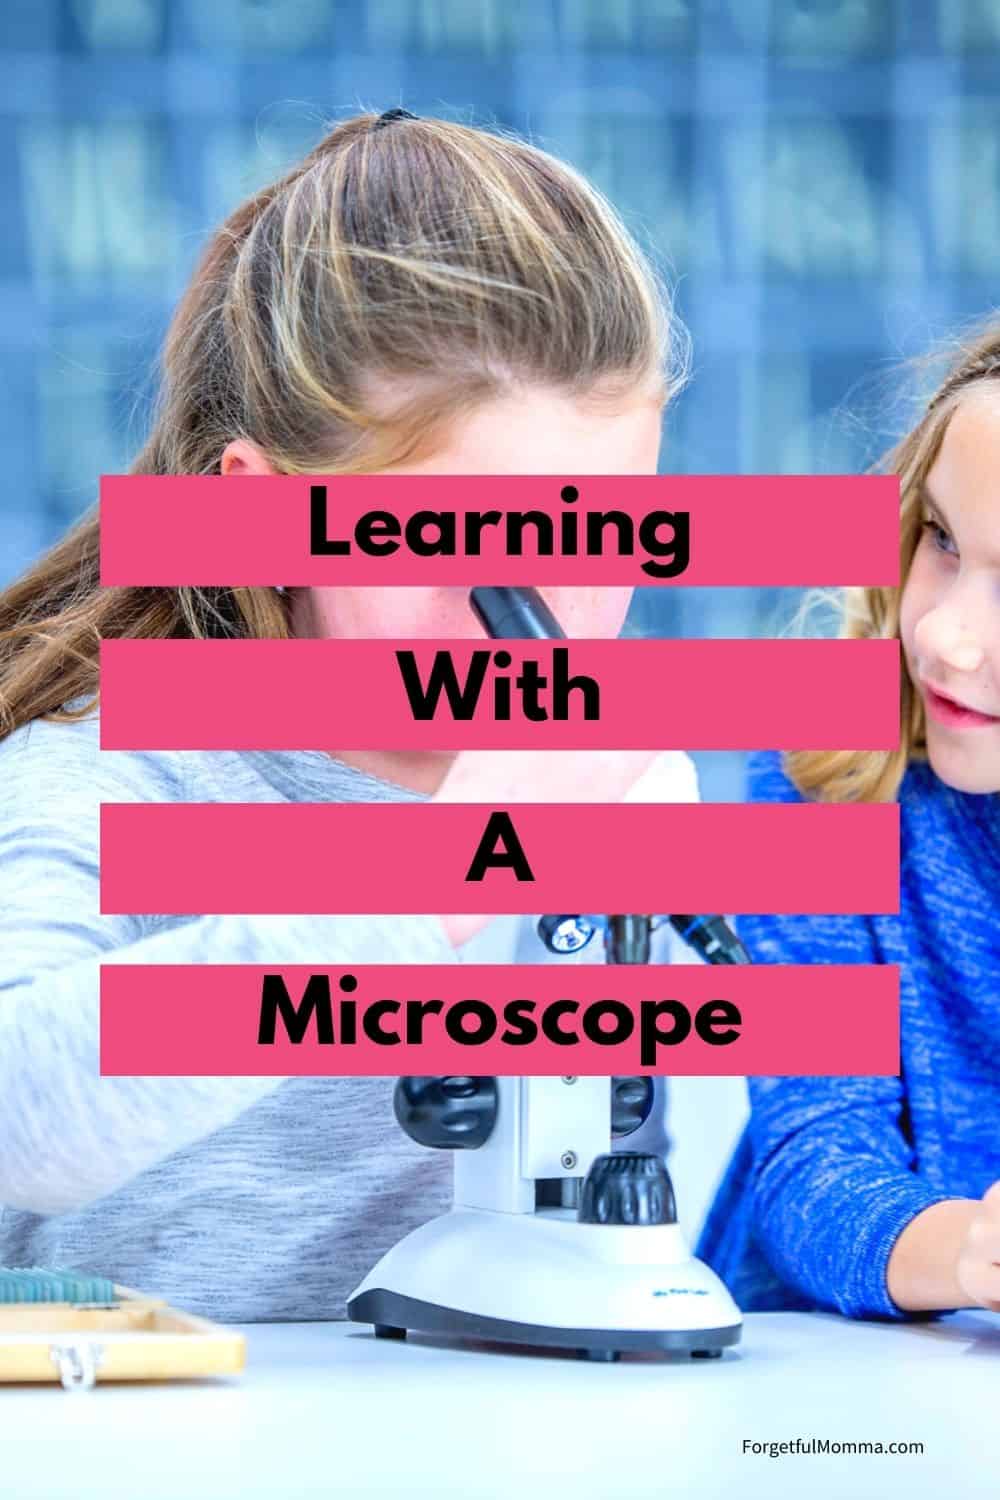 Learning with A Microscope - child looking into a microscope with text overlay